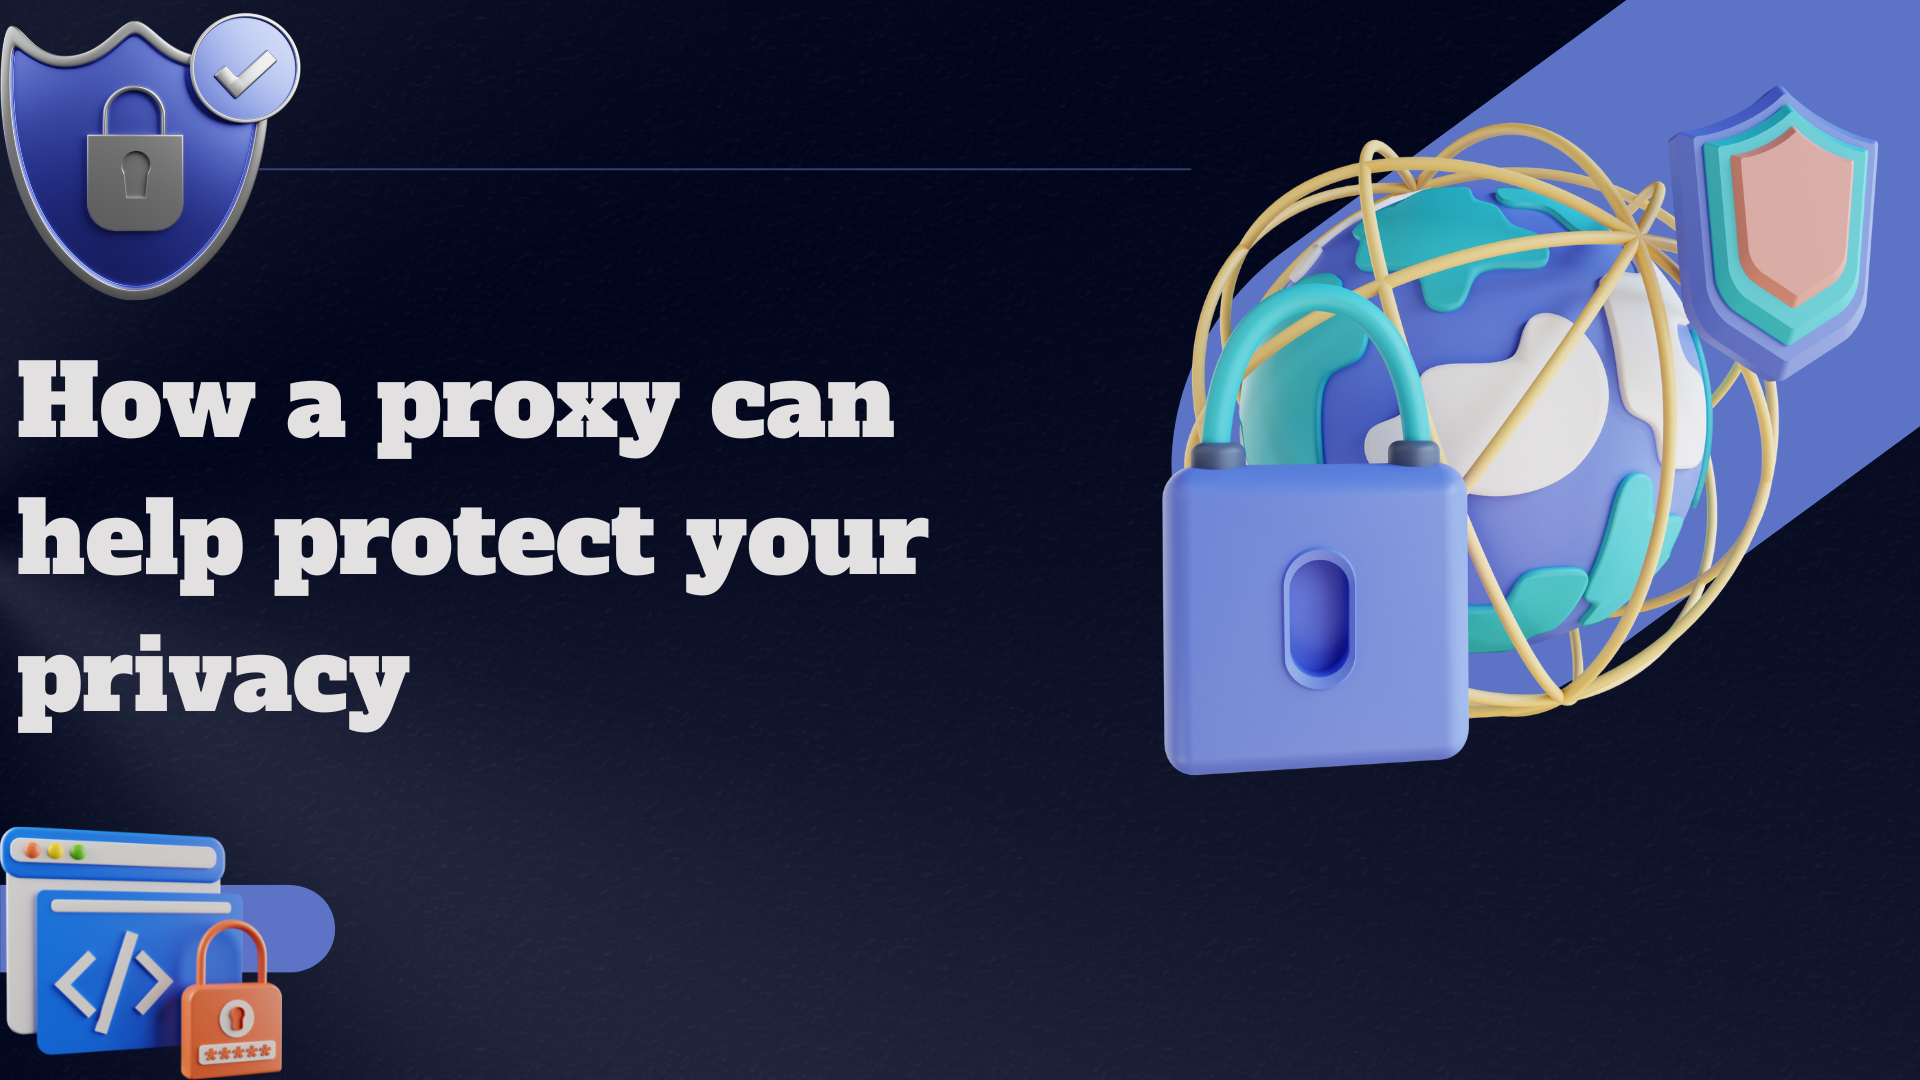 How a proxy can help protect your privacy